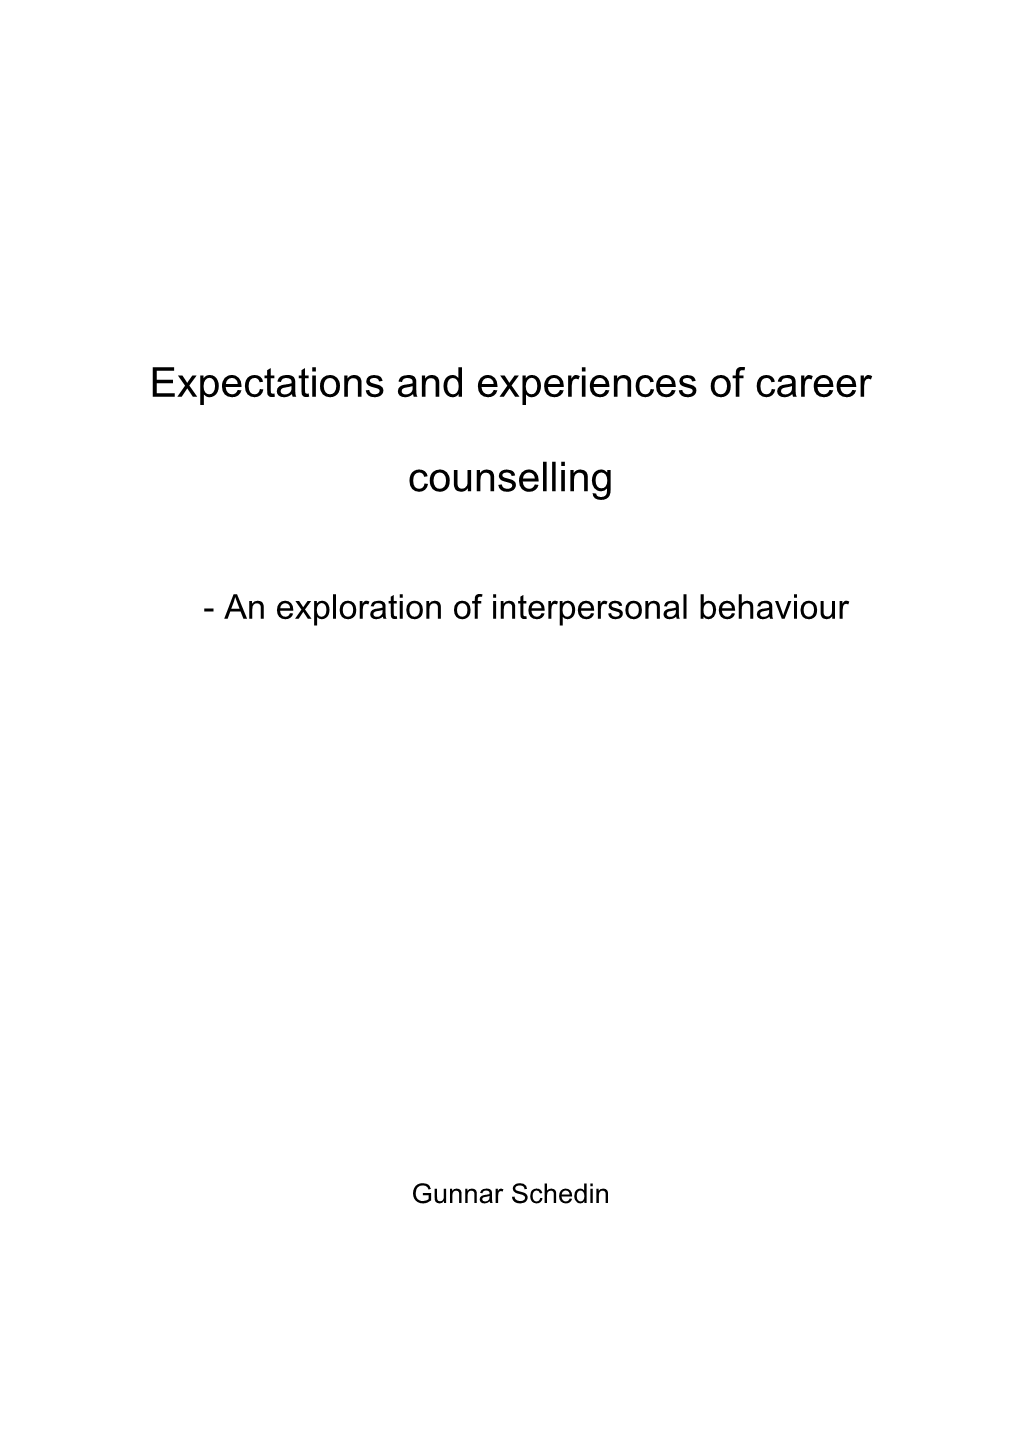 Expectations and Experiences of Career Counselling